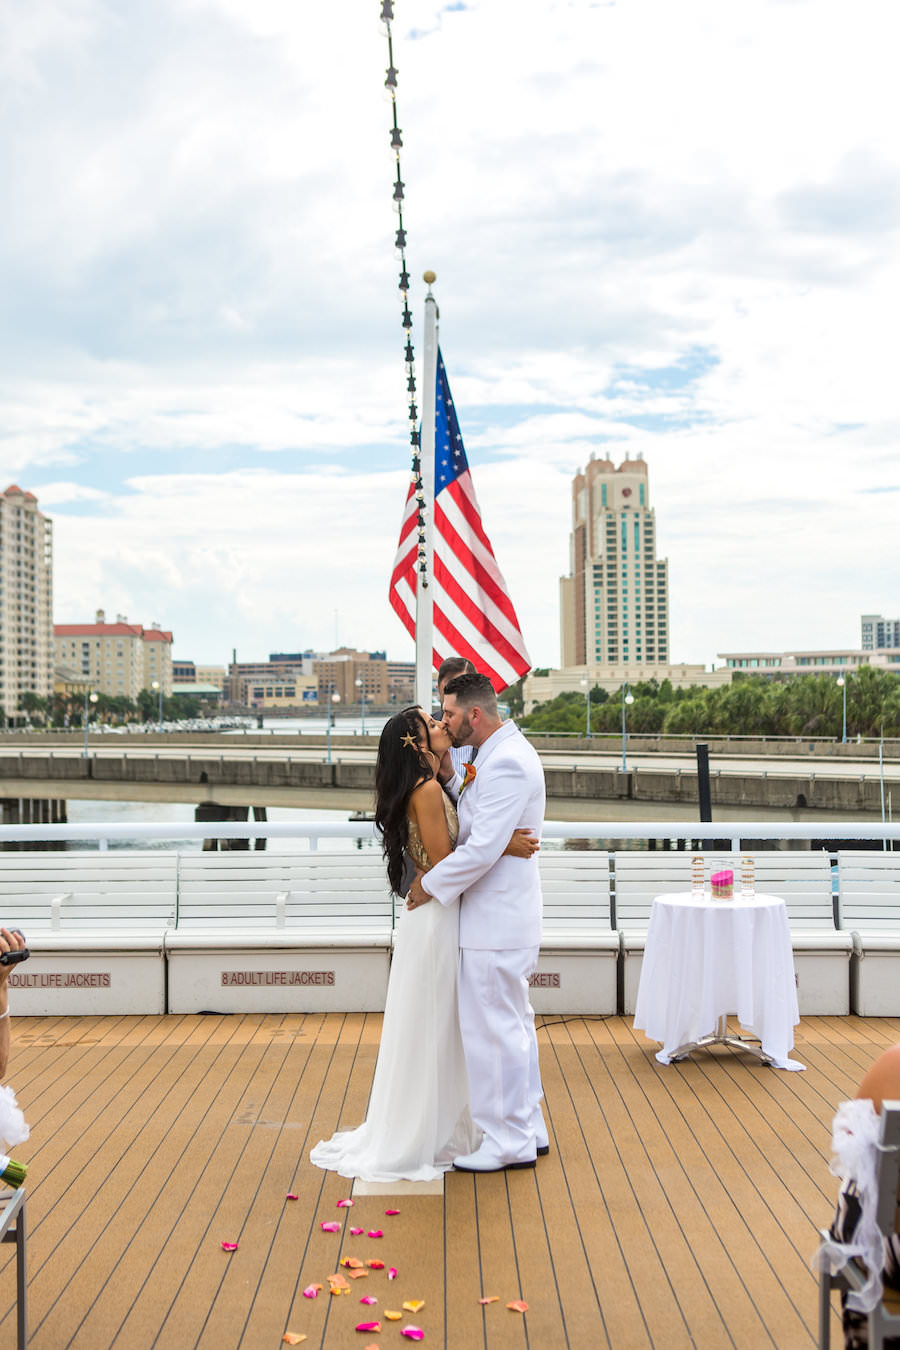 Waterfront Wedding Ceremony First Kiss | Downtown Tampa Wedding Venue Yacht StarShip